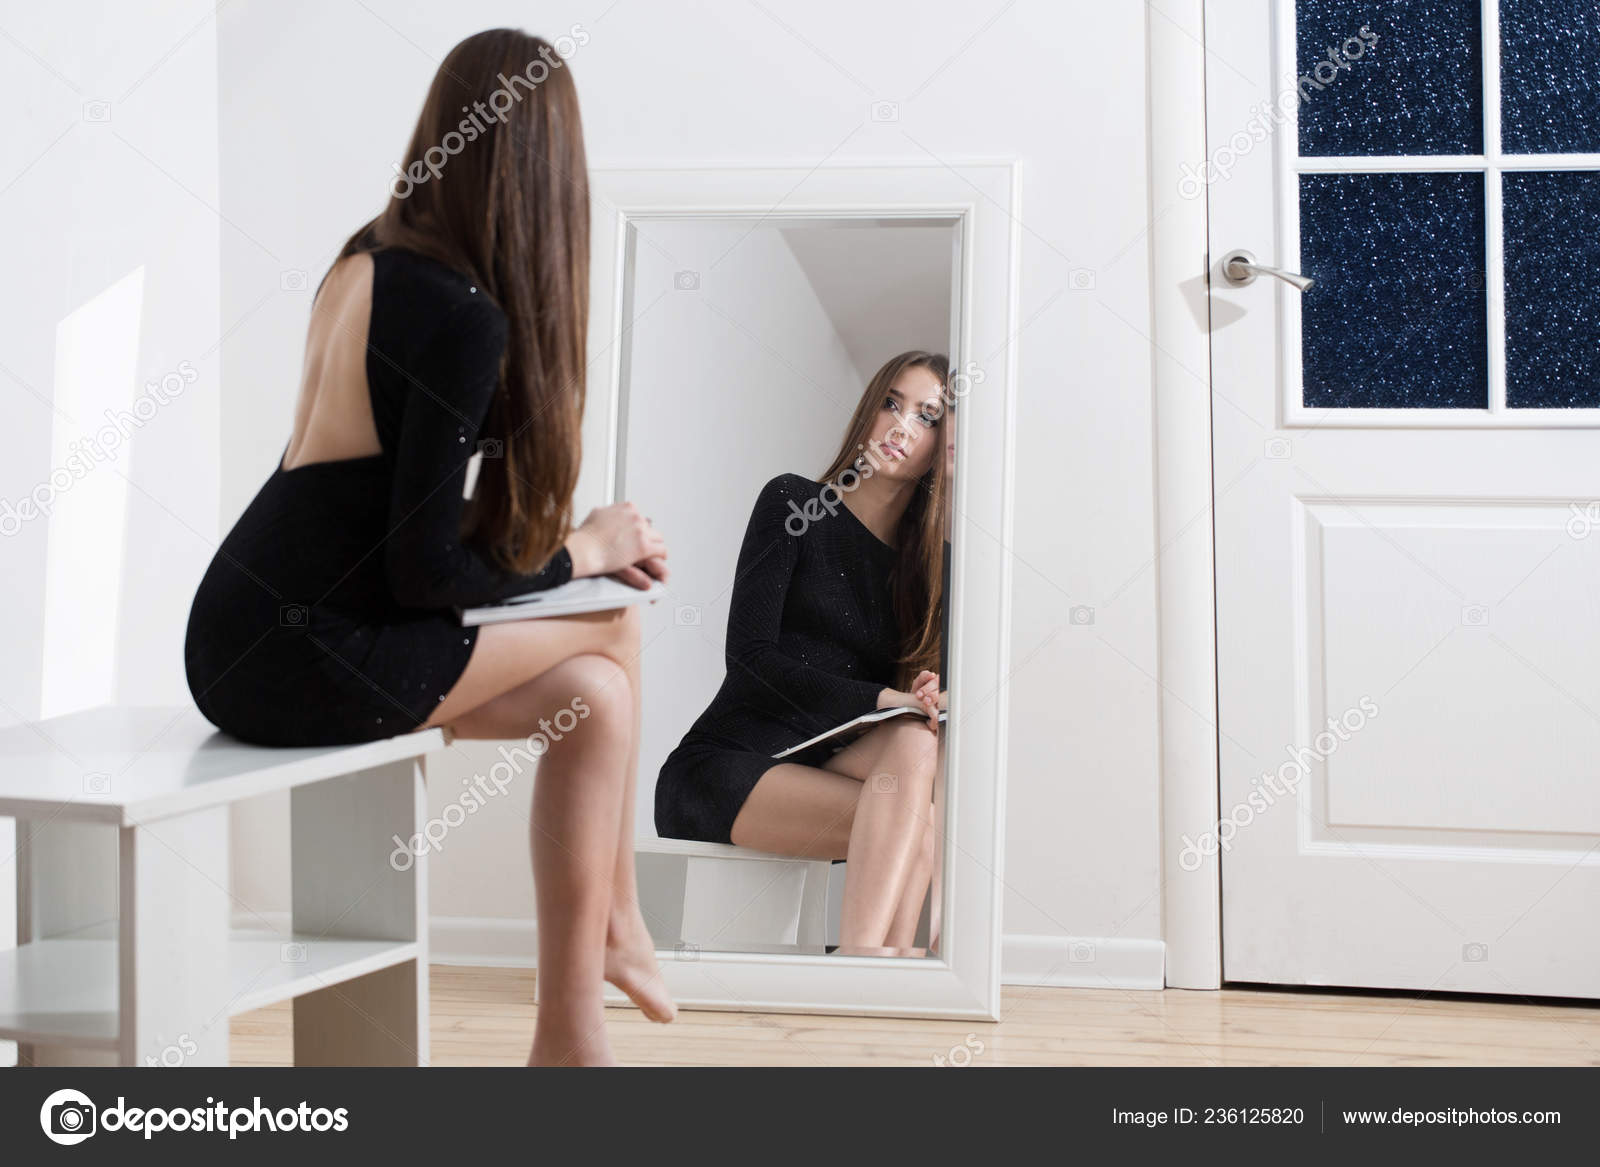 Boy Teen Mirror High Resolution Stock Photography And Images